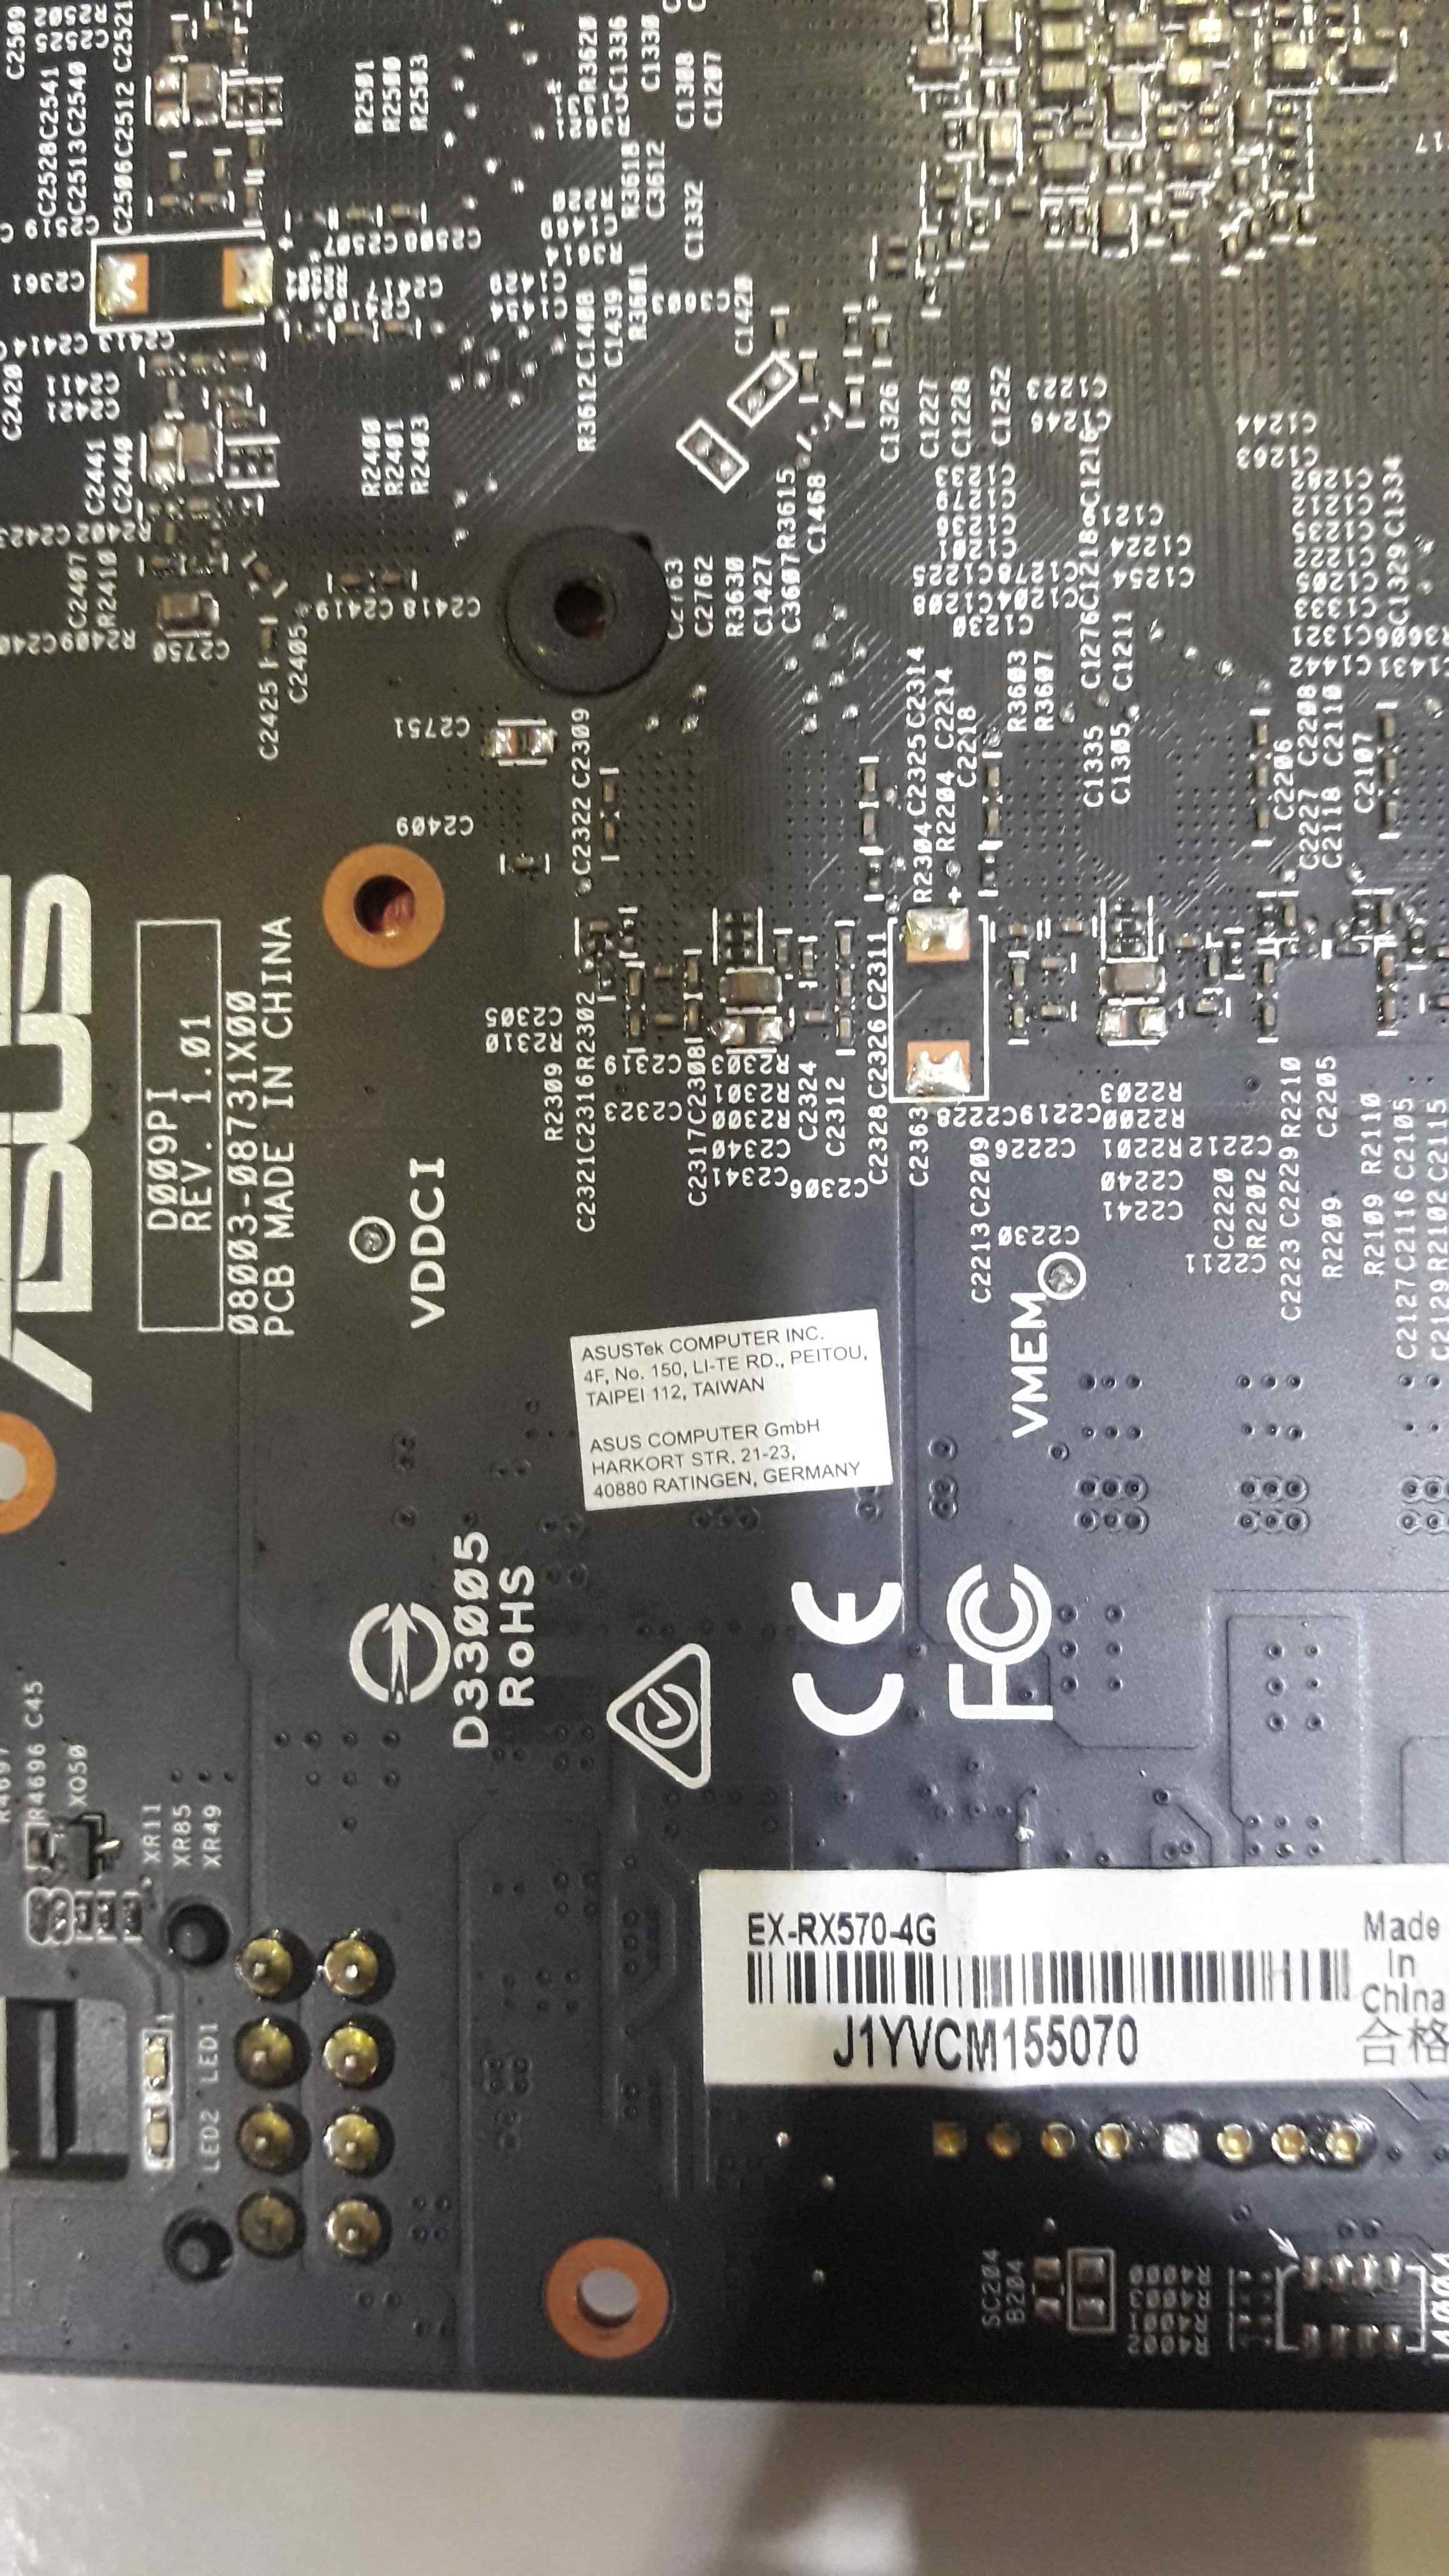 Robe Lake Titicaca triangle Need Asus RX 570 4GB Expedition bios Hynix memory | TechPowerUp Forums